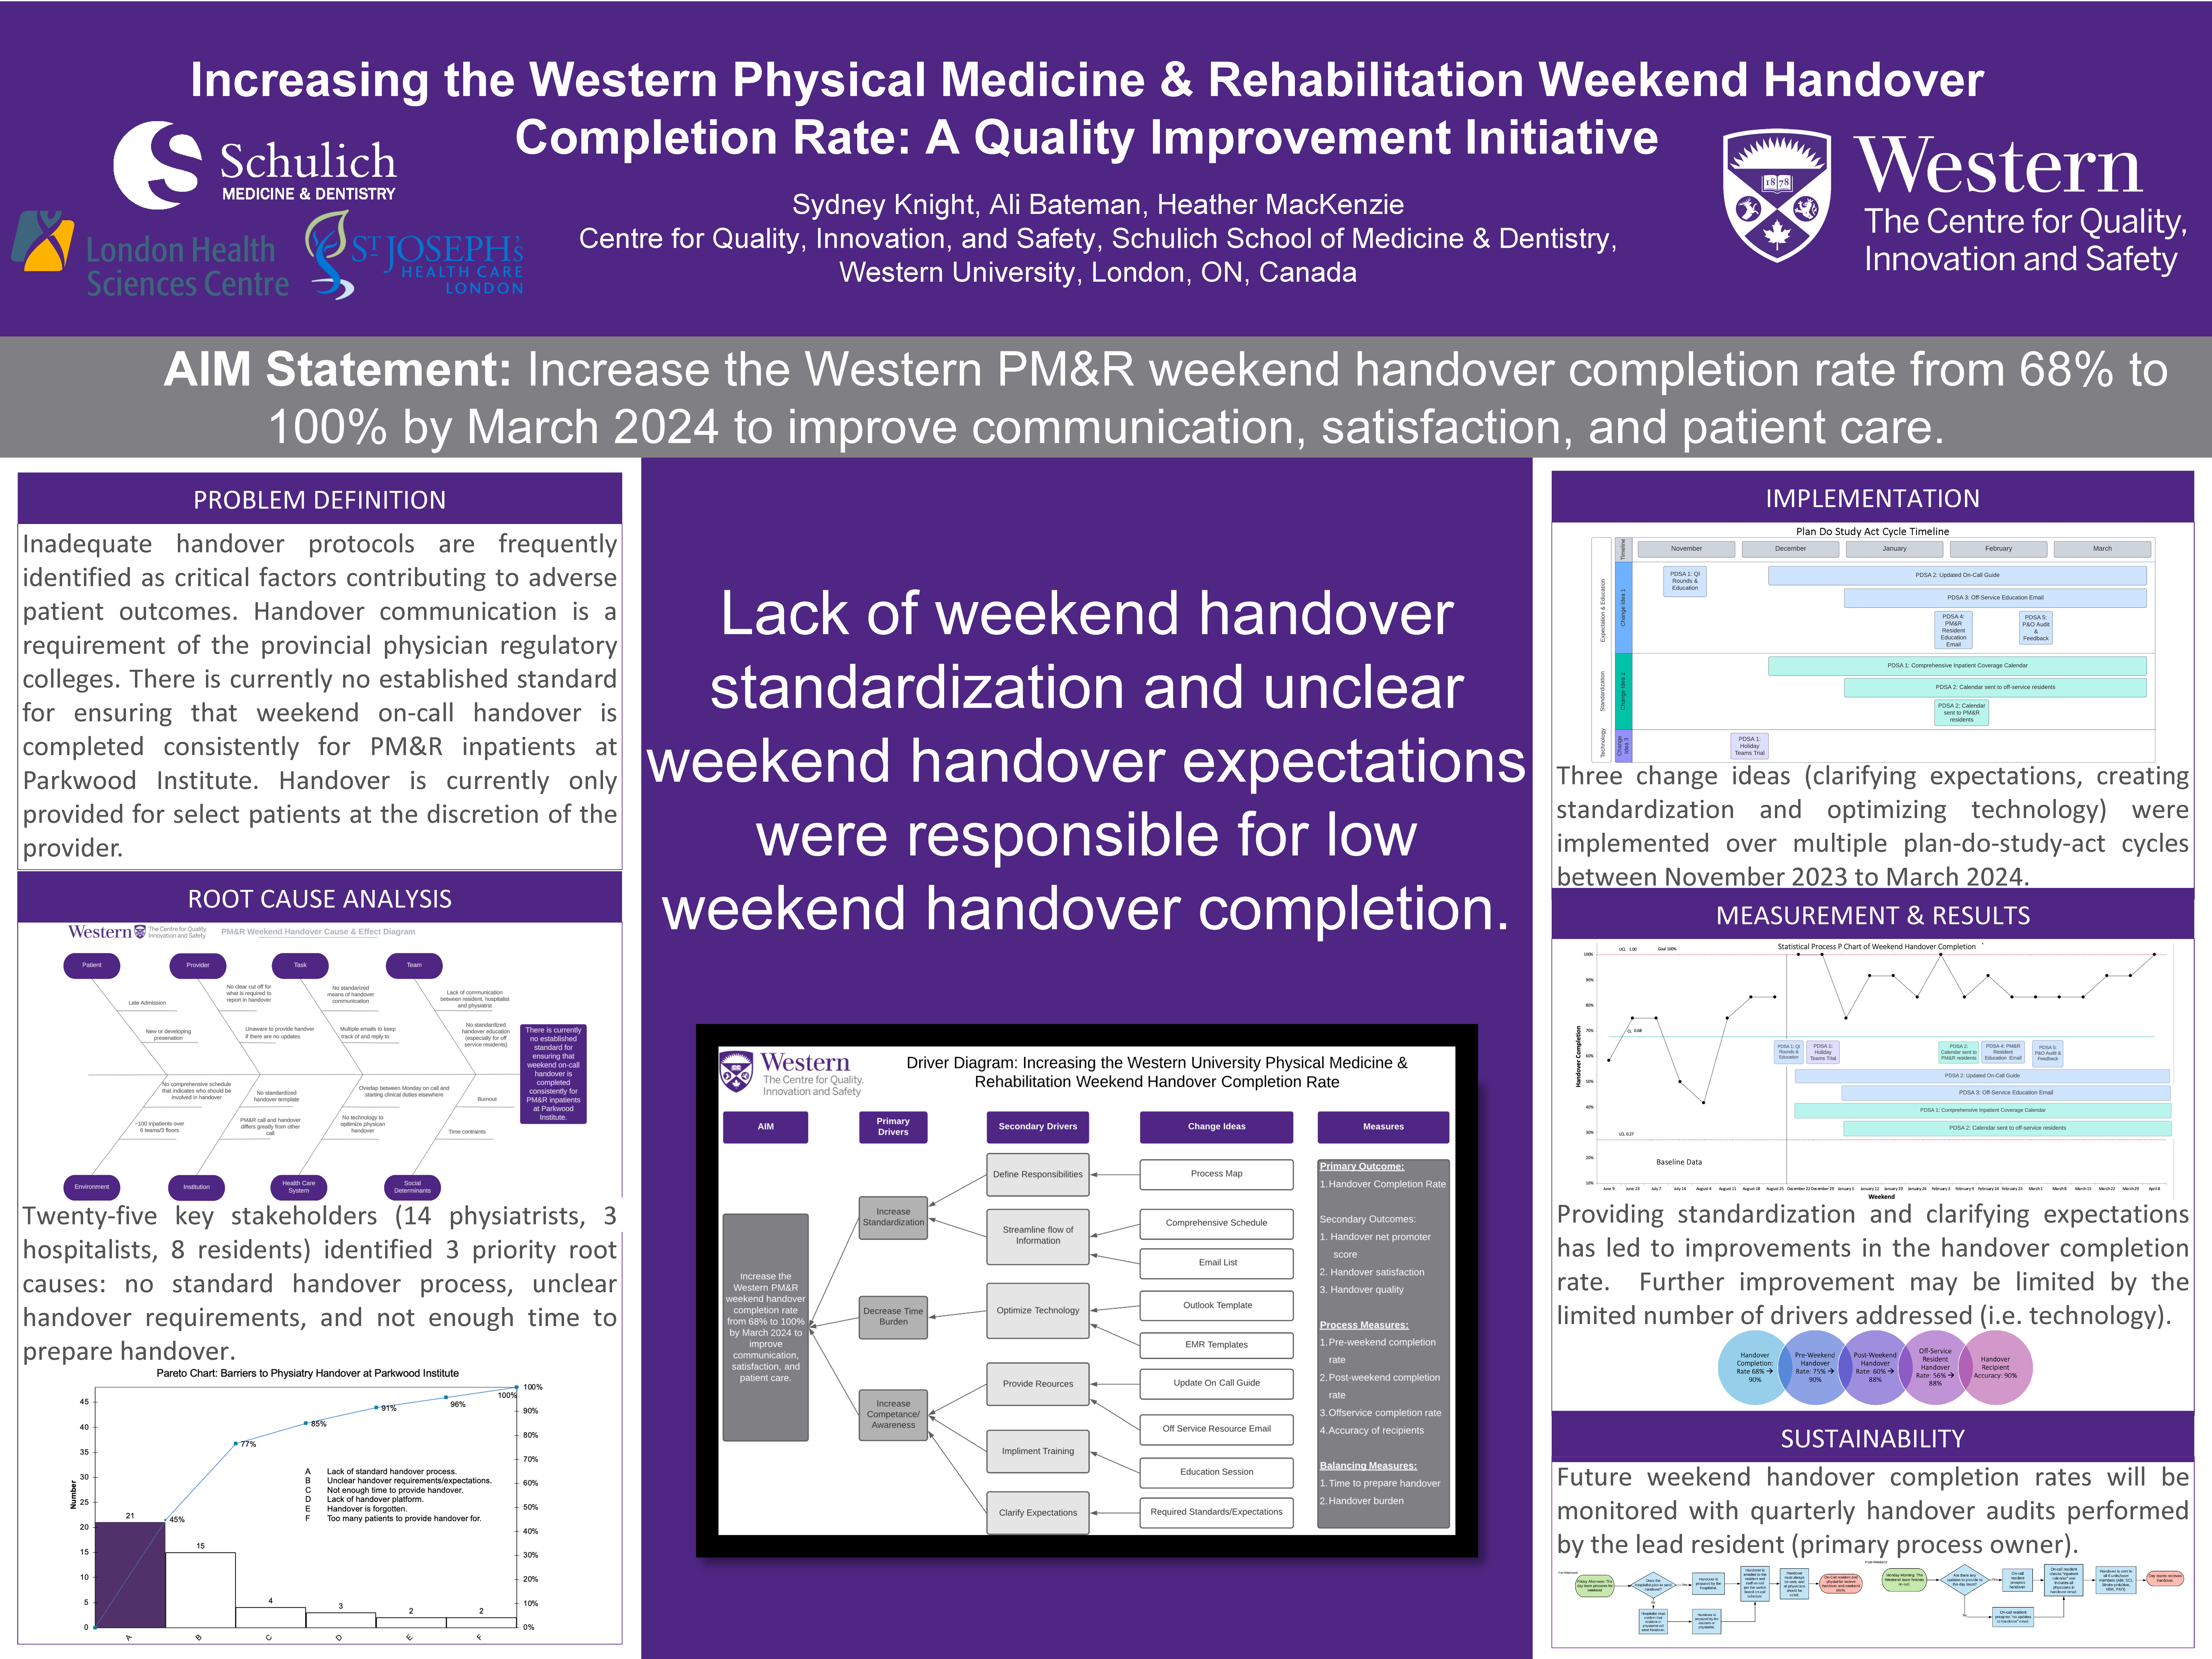 BISQ_2023-2024_Increasing_the_Western_Physical_Medicine_&_Rehabilitation_Weekend_Handover_Completion_Rate:_A_Quality_Improvement_Initiative_Poster.png